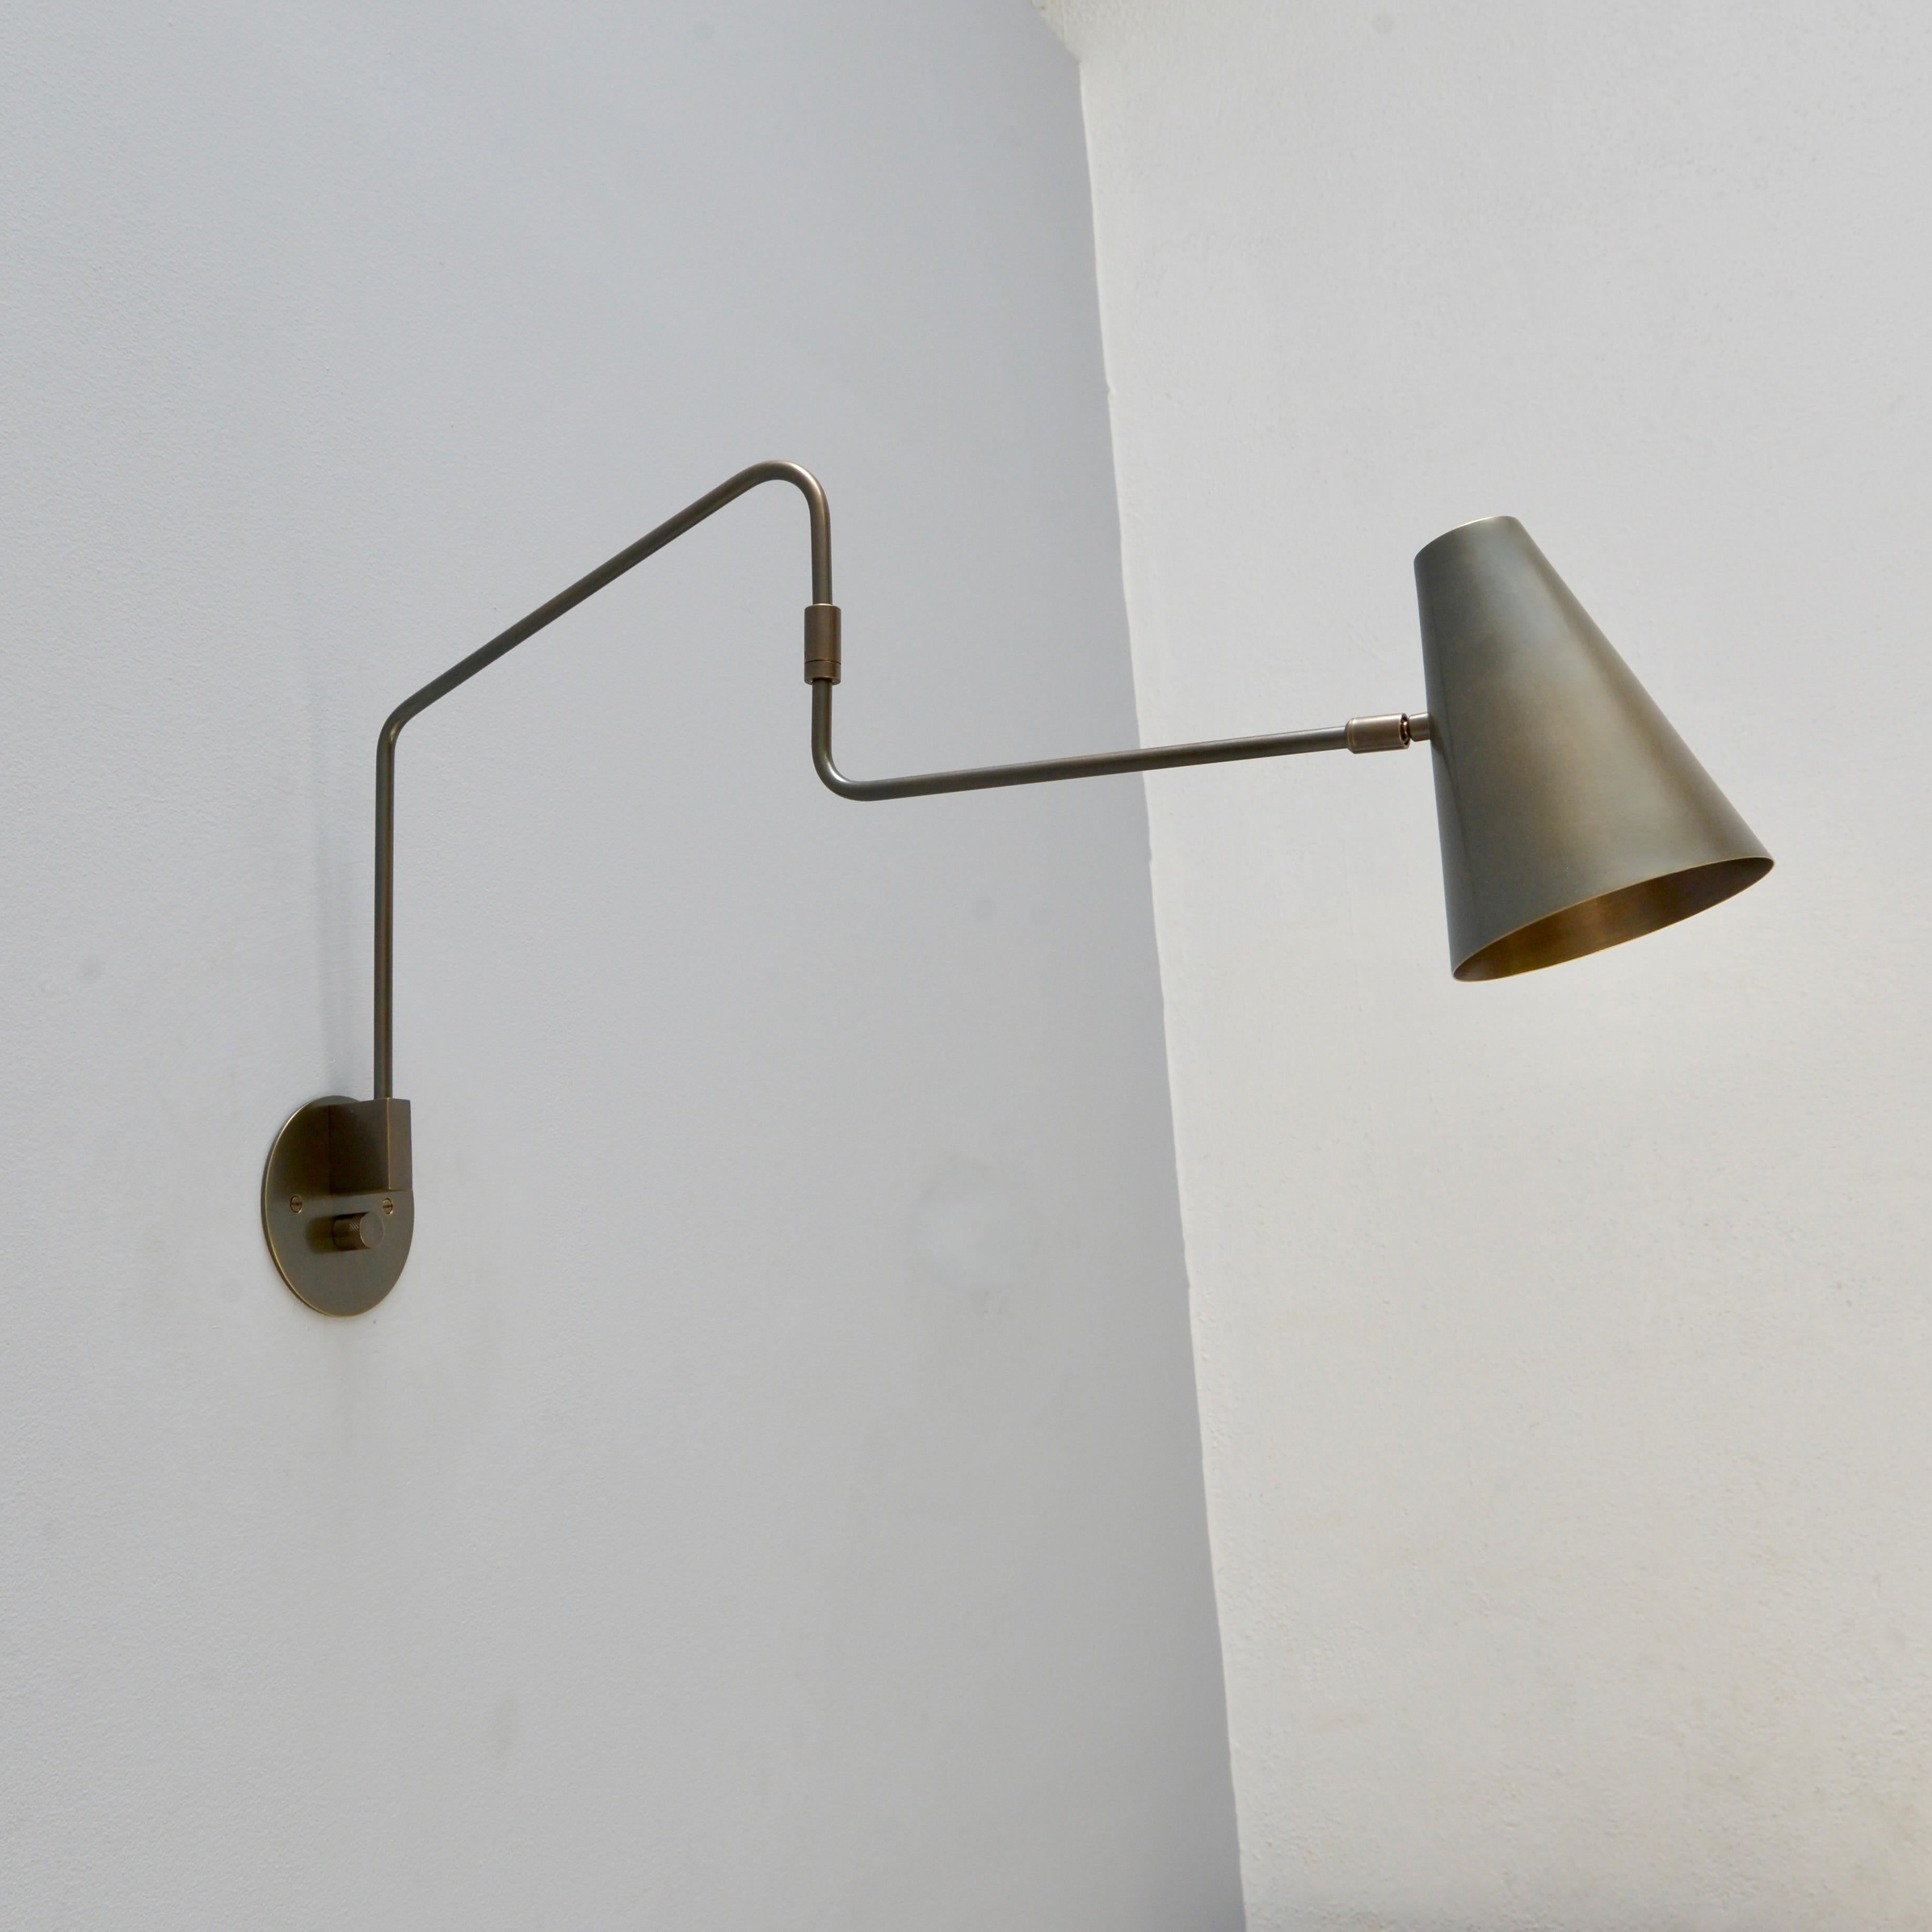 Beautiful patinated brass LU Swing Sconce by Lumfardo Luminaires. Made contemporary in the US. Fabricated in all brass in a rich dark patinated finish. Multiples available for order. Wired with E26 medium based socket, but can also be wired for use